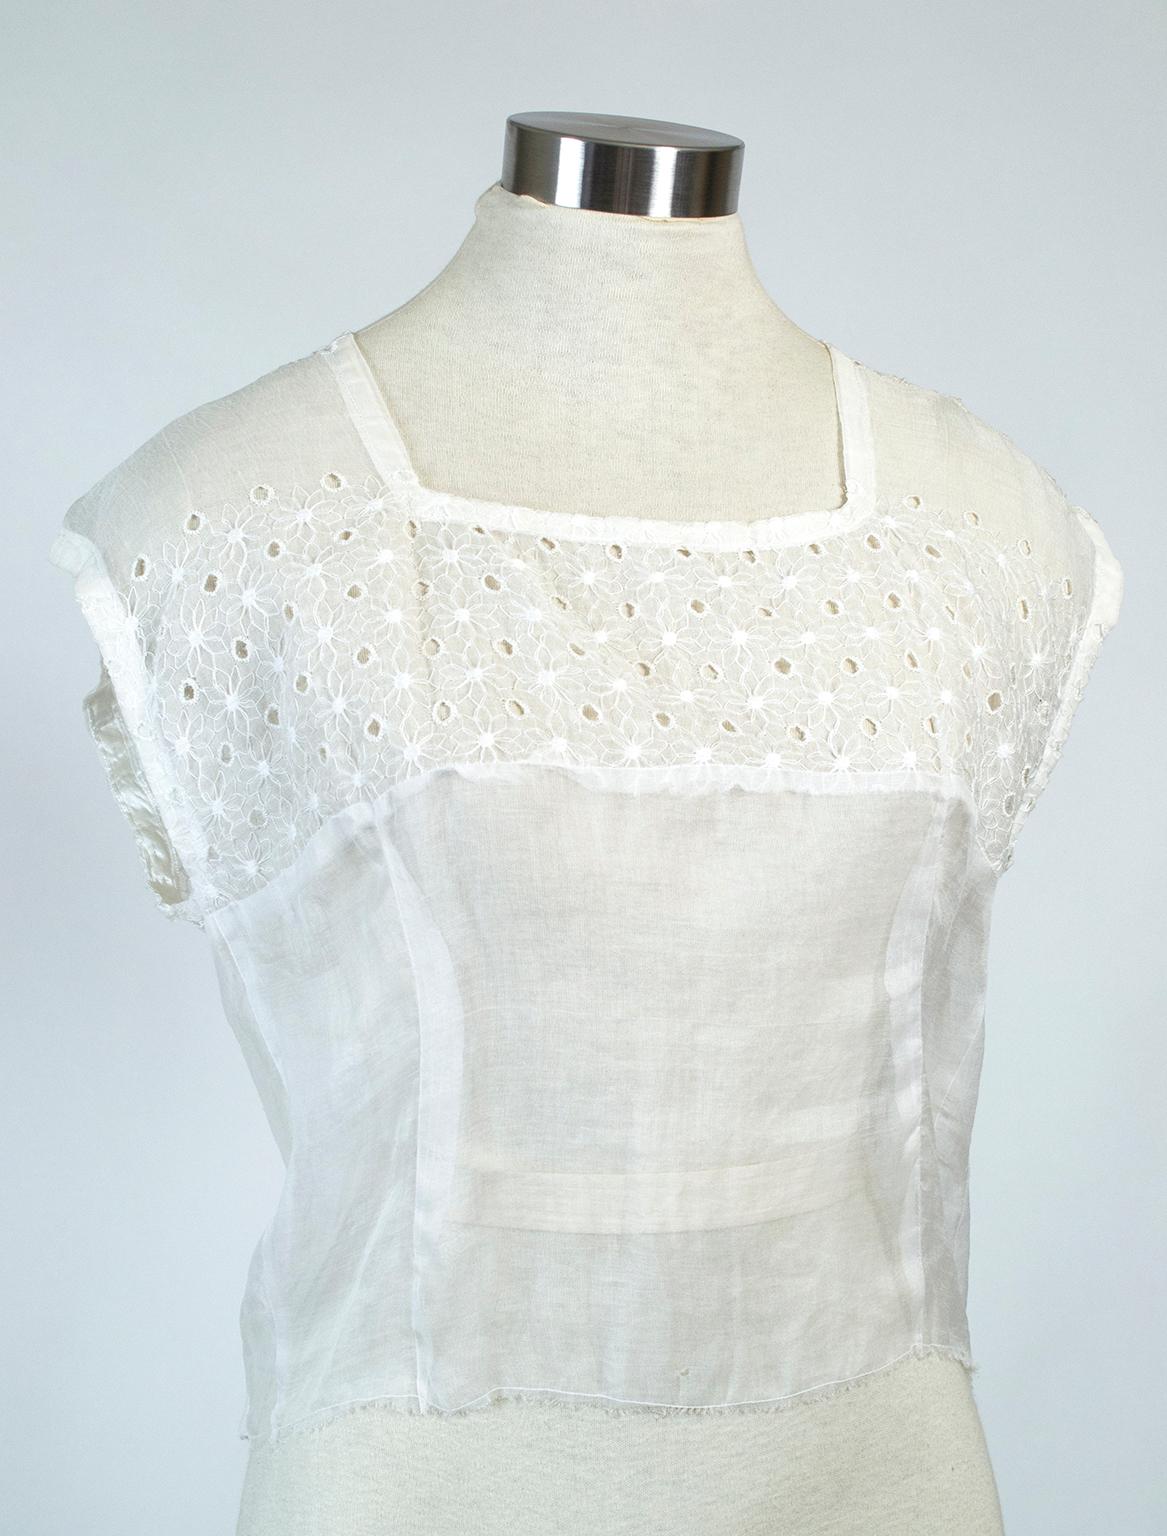 As delicate as a butterfly’s wings, this timeless blouse is as fashionable, ladylike and elegant today as it was a century ago. The square neckline adds unexpected geometry and makes it even more wearable with modern fashion.

Sheer, sleeveless